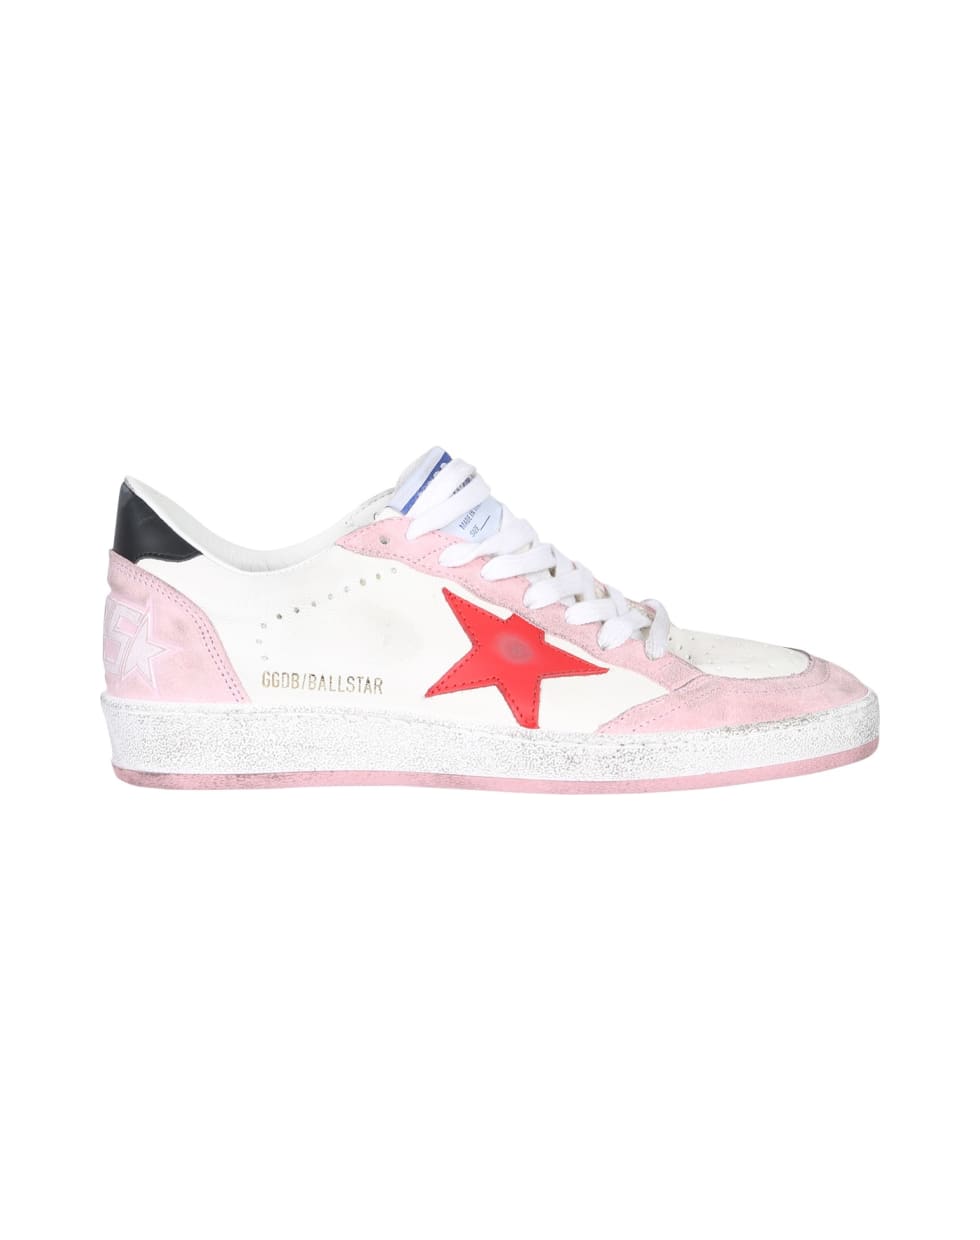 Best price on the market at italist | Golden Goose Ball Star Sneakers | Italist